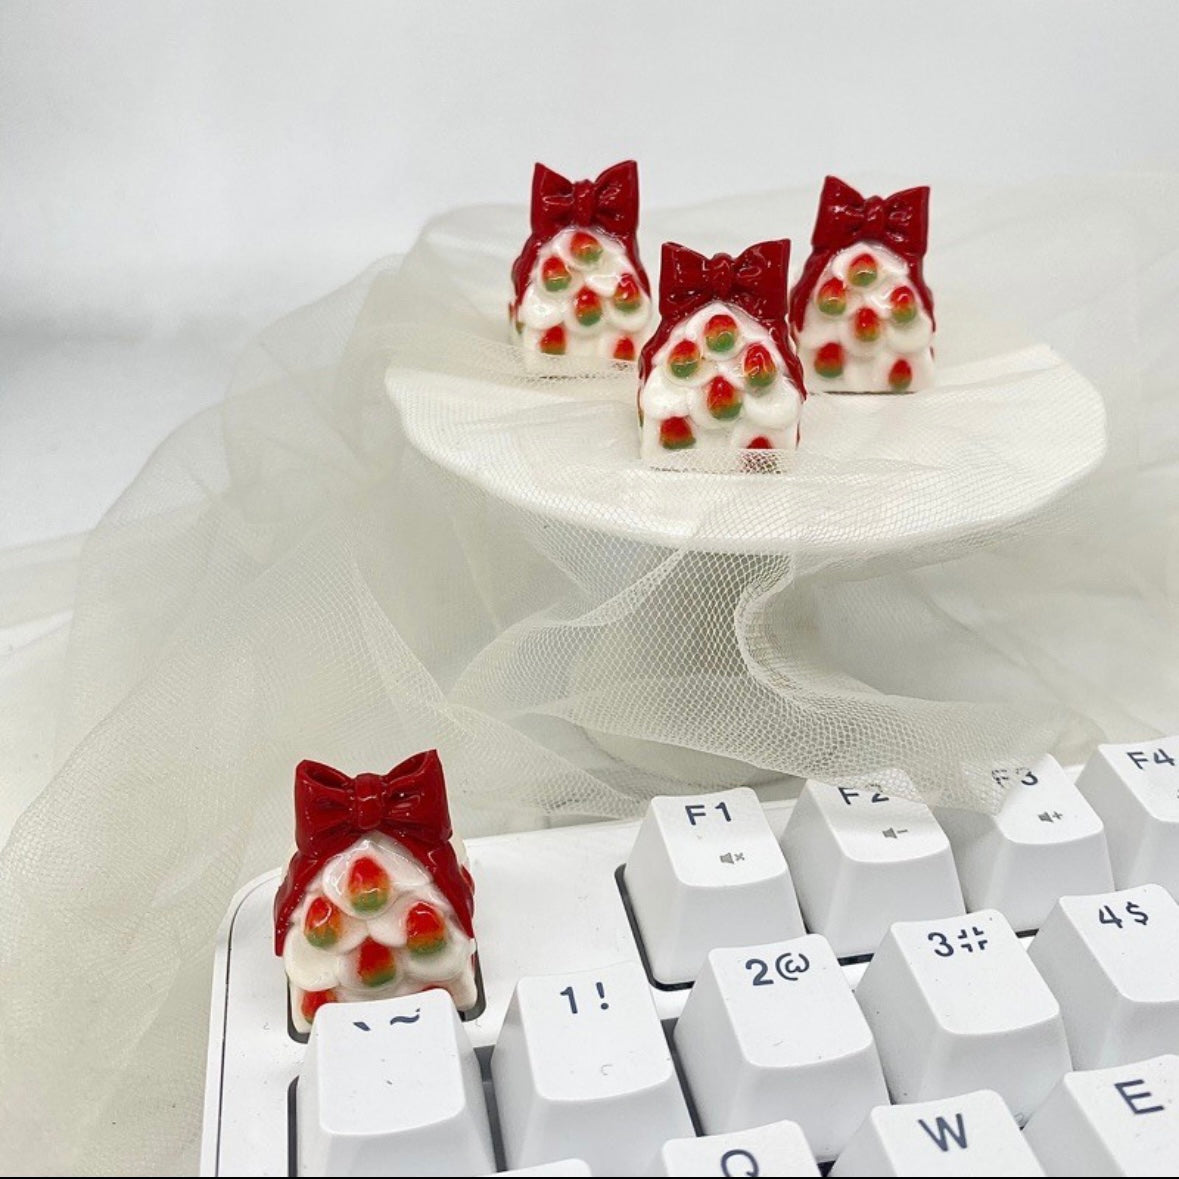 "Get into the holiday spirit with our 'Strawberry Christmas Tree Gift' Custom Artisan Keycaps. Handcrafted with care, these keycaps feature a whimsical design of a strawberry Christmas tree gift, adding a touch of festive cheer to your keyboard. They make for a delightful gift for yourself or fellow enthusiasts. Elevate your keyboard setup with these unique and charming artisan keycaps." 🍓🎄🎁 #Keycaps #ArtisanKeycaps #ChristmasCheer